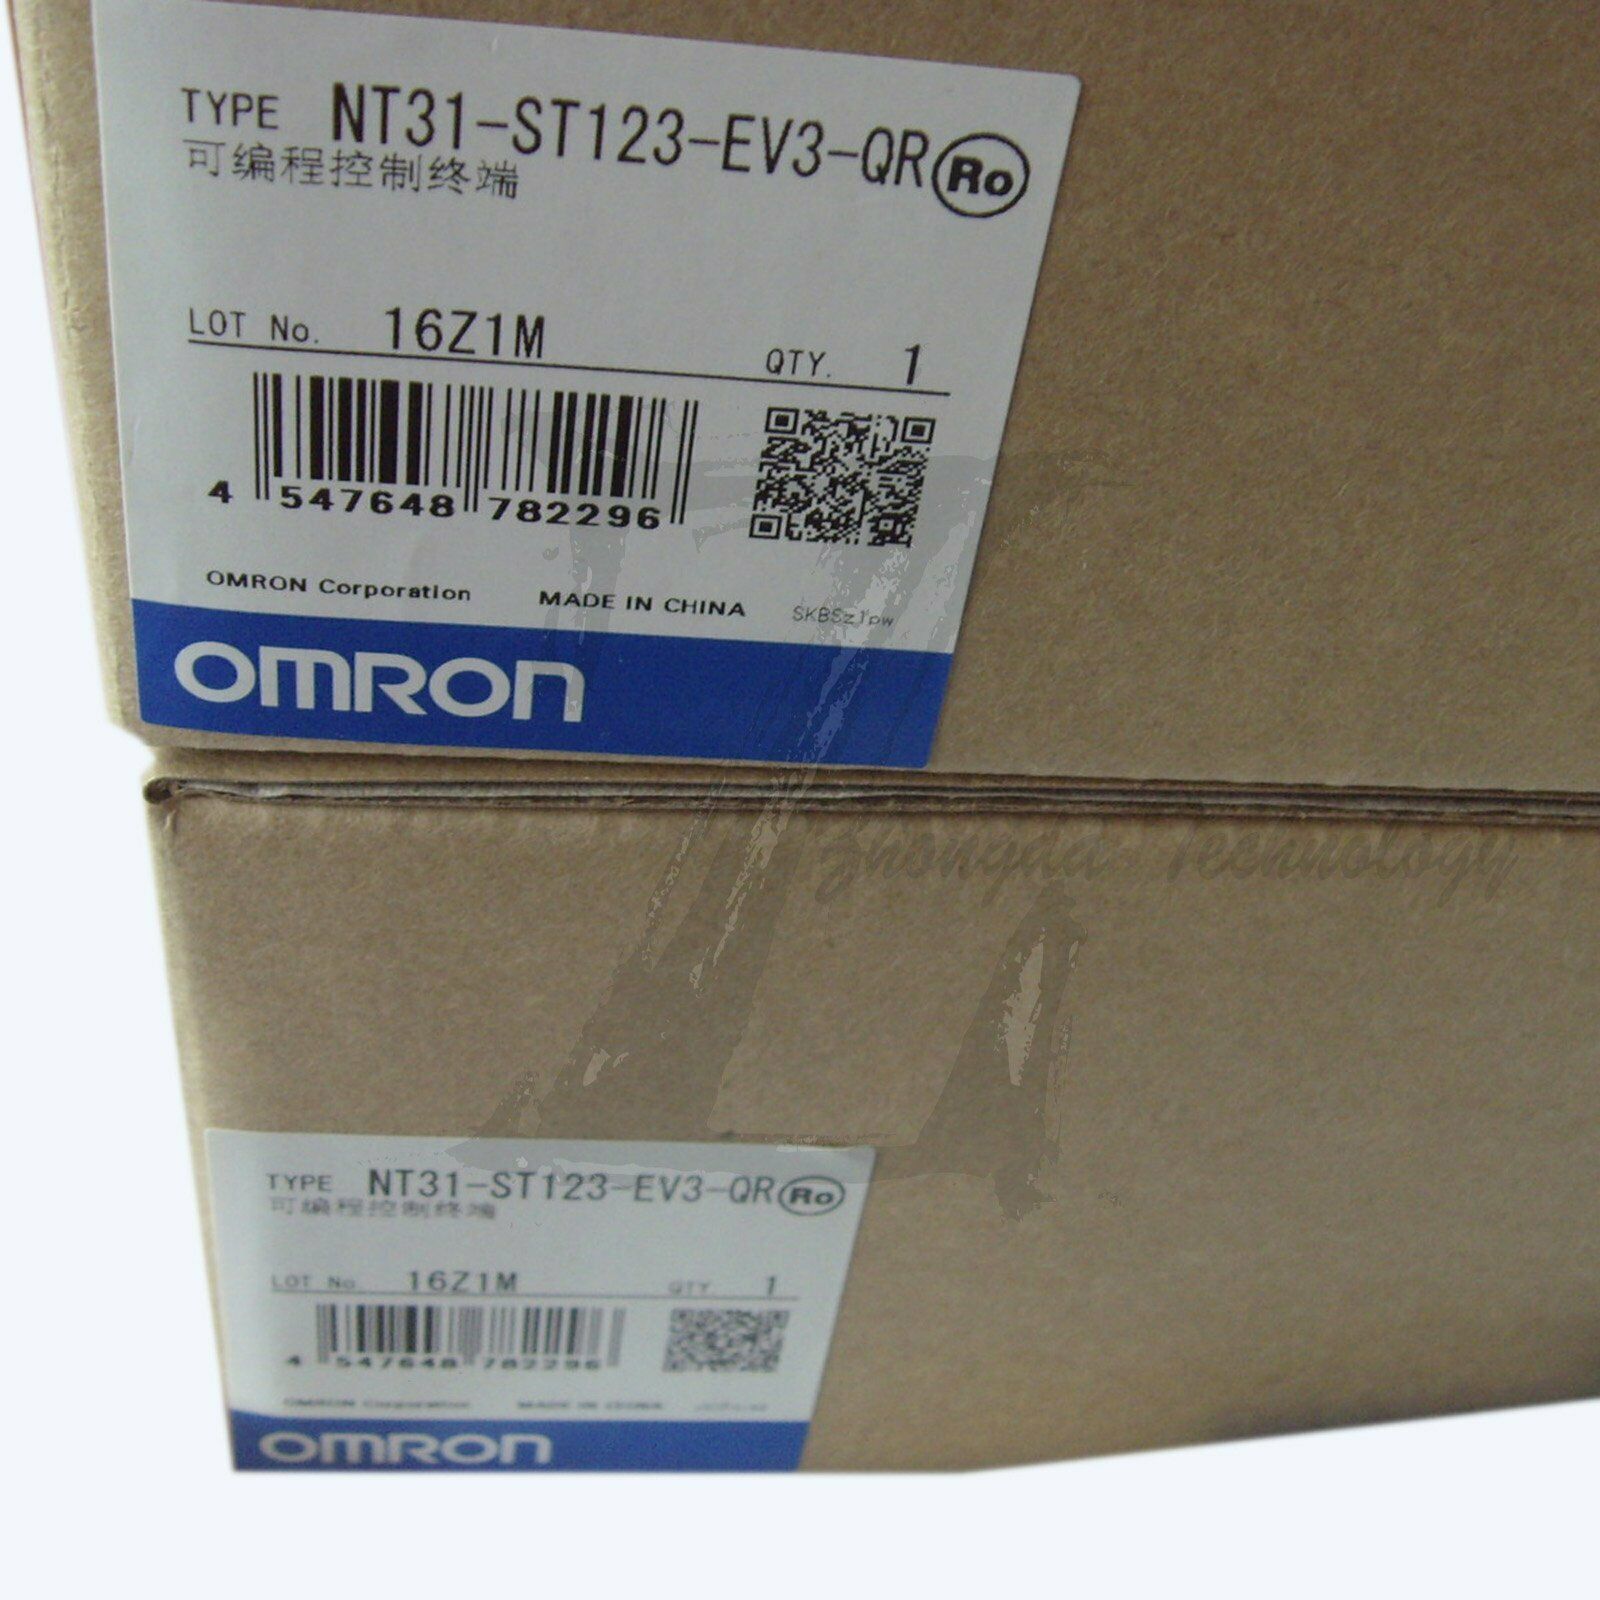 1pc new Omron NT31-ST123-EV3 module one year warranty KOEED 201-500, 80%, import_2020_10_10_031751, Omron, Other